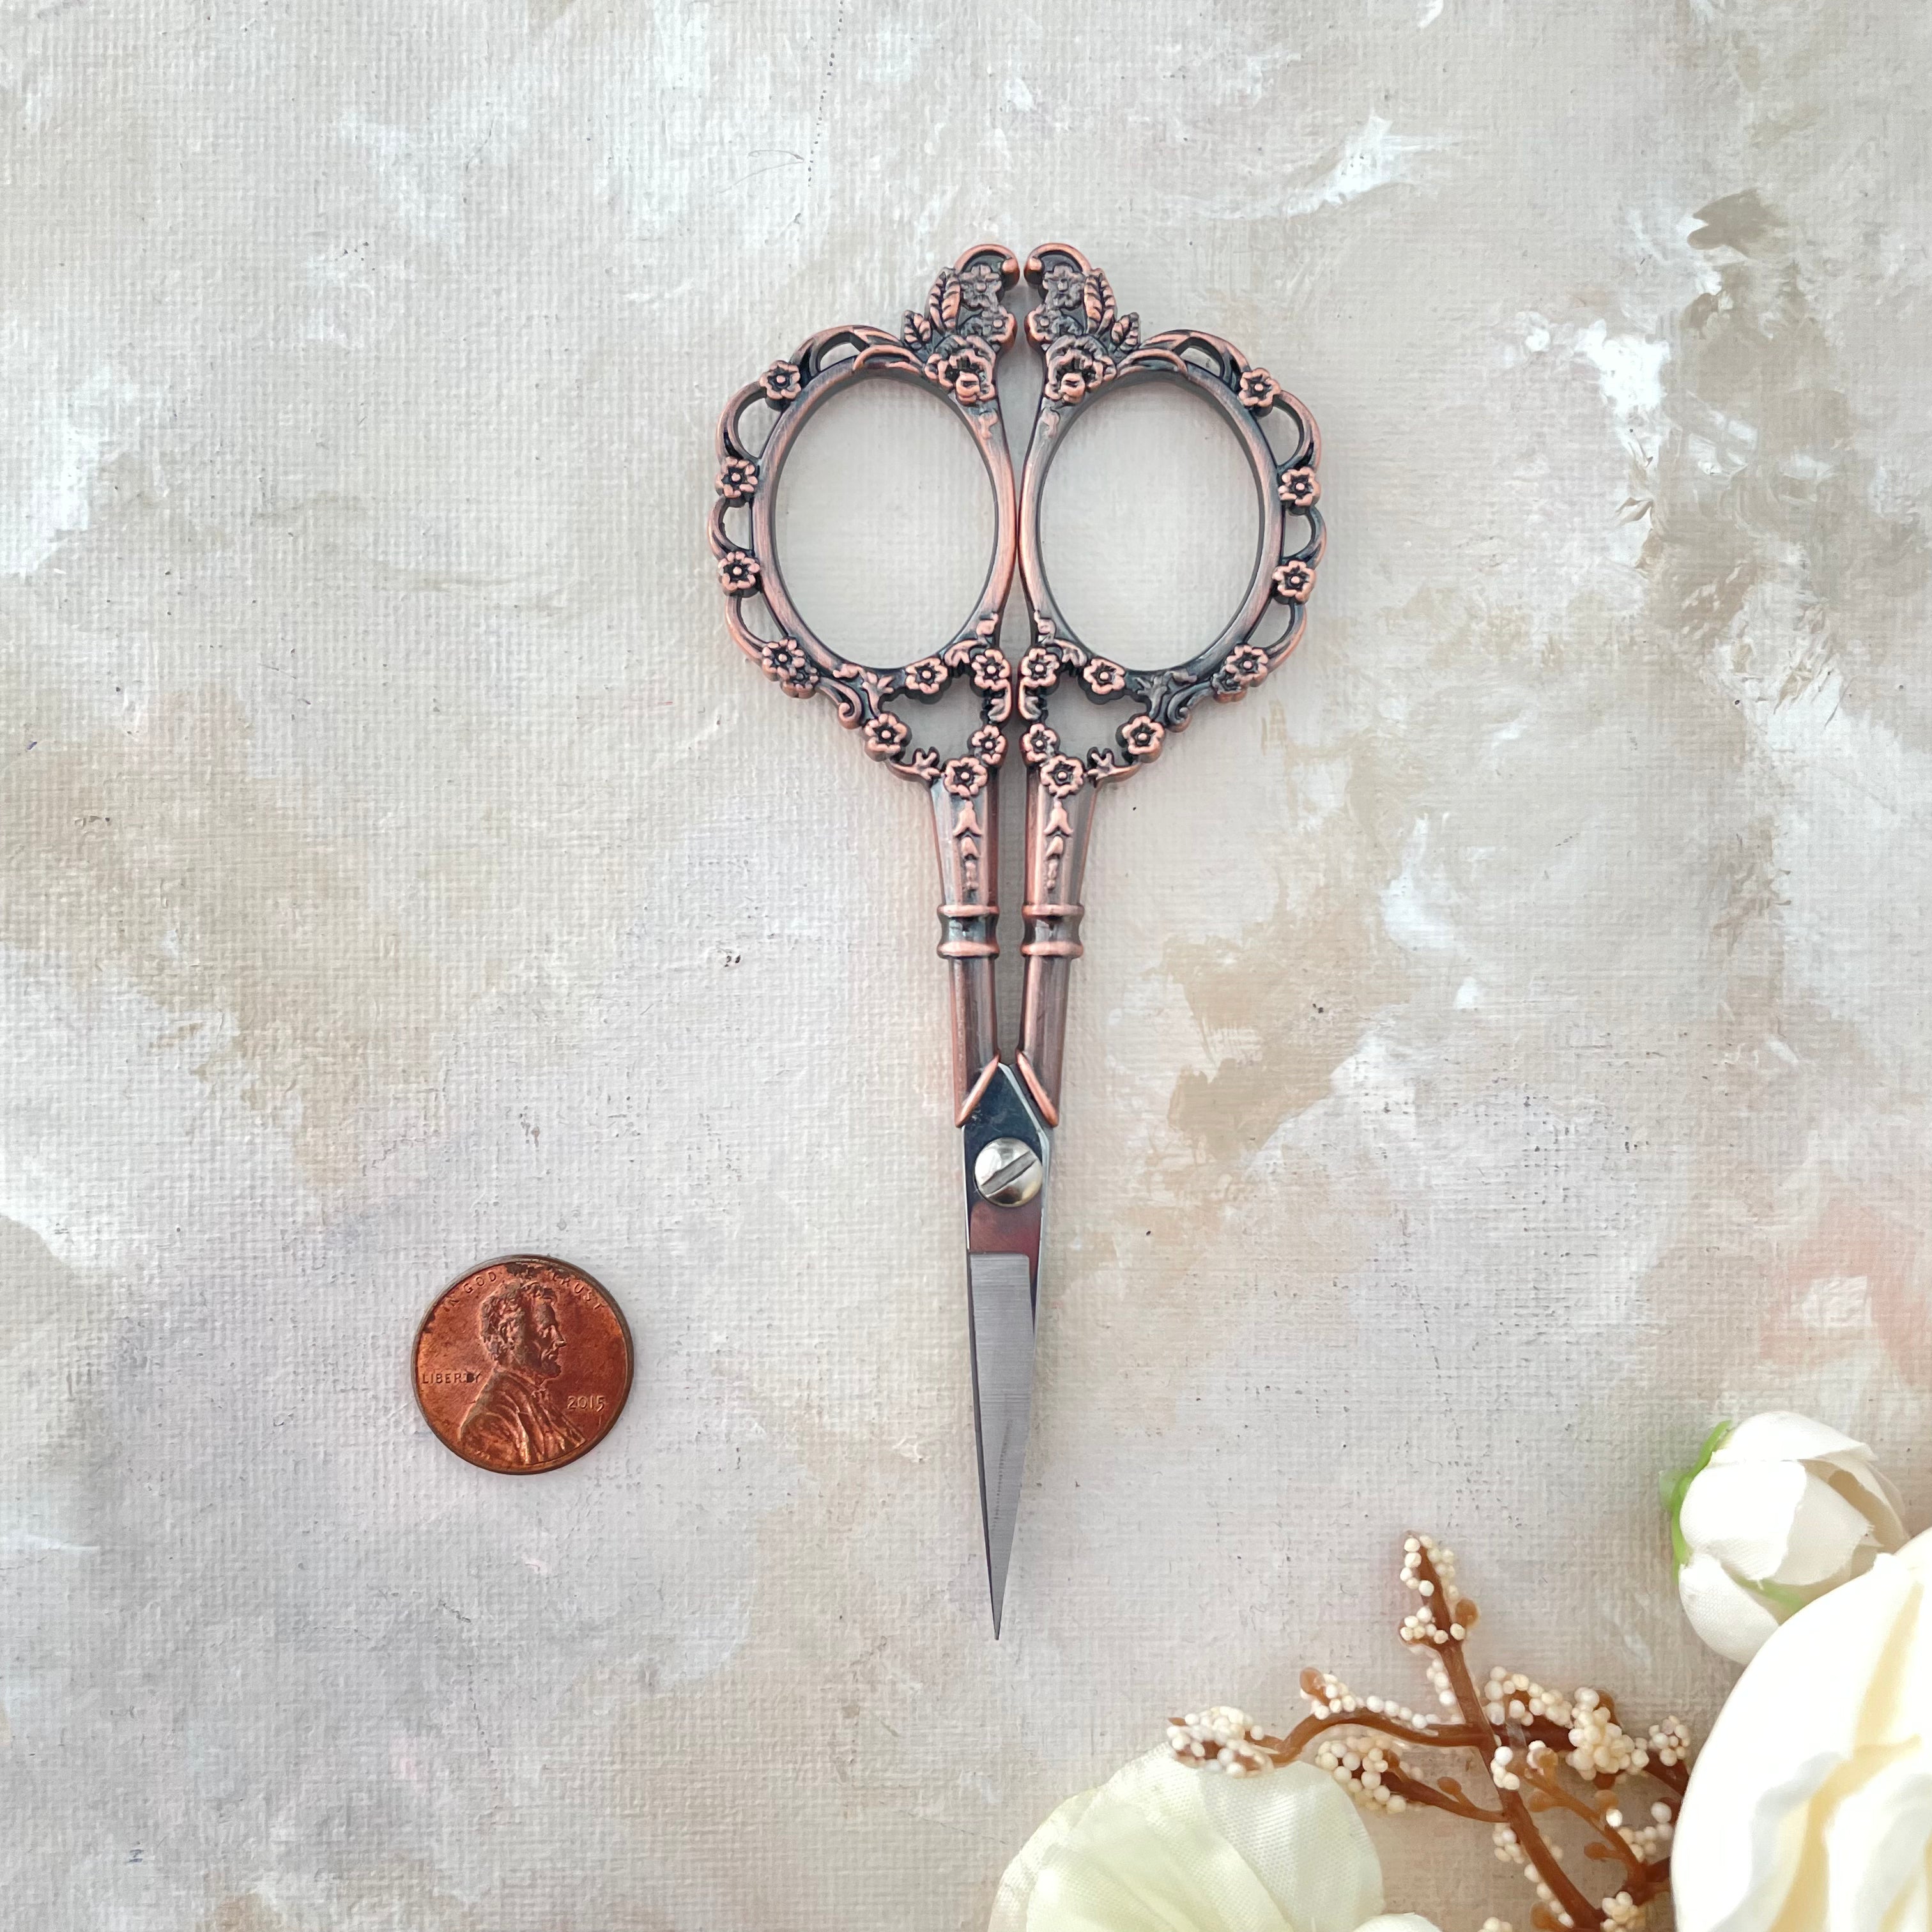 Floral Scissors in ANTIQUED ROSE GOLD with SILVER blades-  Wedding Flat lay props from Champagne & GRIT